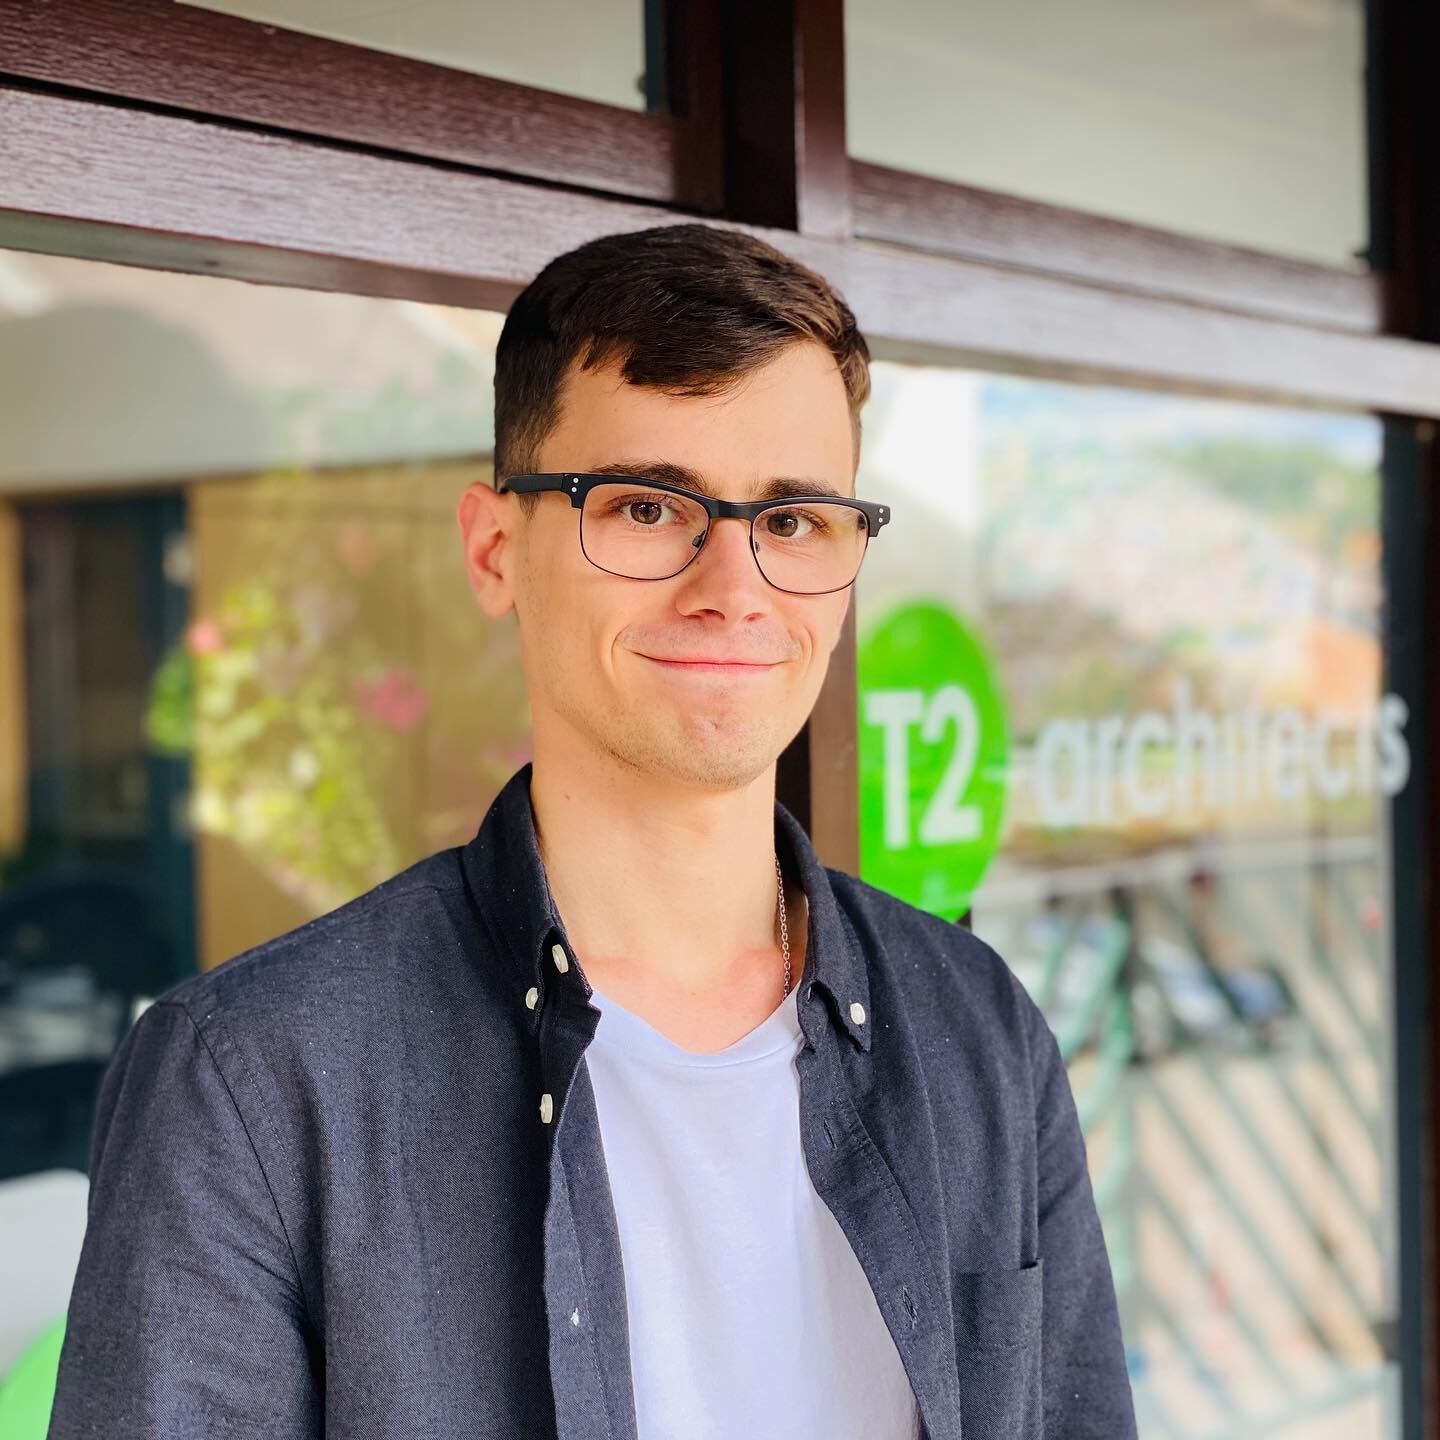 We are very pleased to welcome Andreas Xenos to the team.  Andreas has joined T2 architects as a Part 1 Architectural Assistant, having graduated with a First Class Honours Degree from The University of Portsmouth School of Architecture.
#universityo